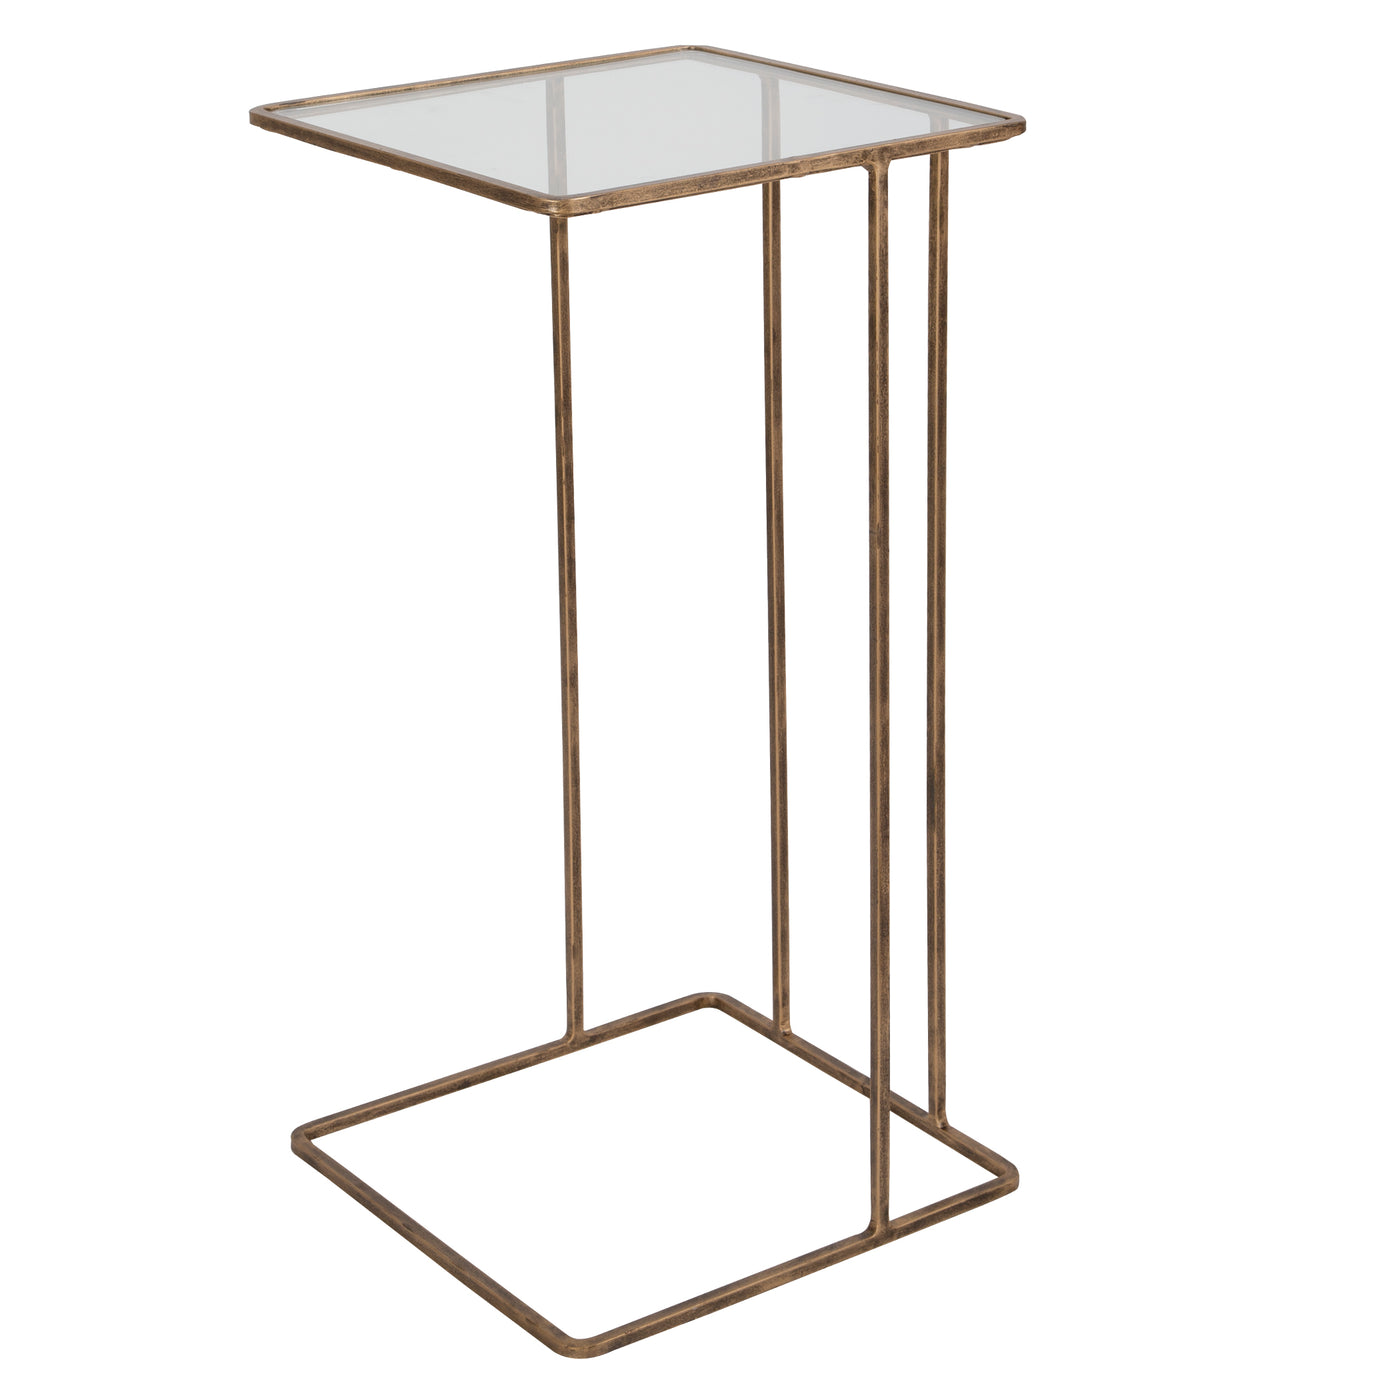 Minimally Designed With Versatility, This Petite Hand Forged Iron Accent Table Is Finished In Heavily Antiqued Gold With A...